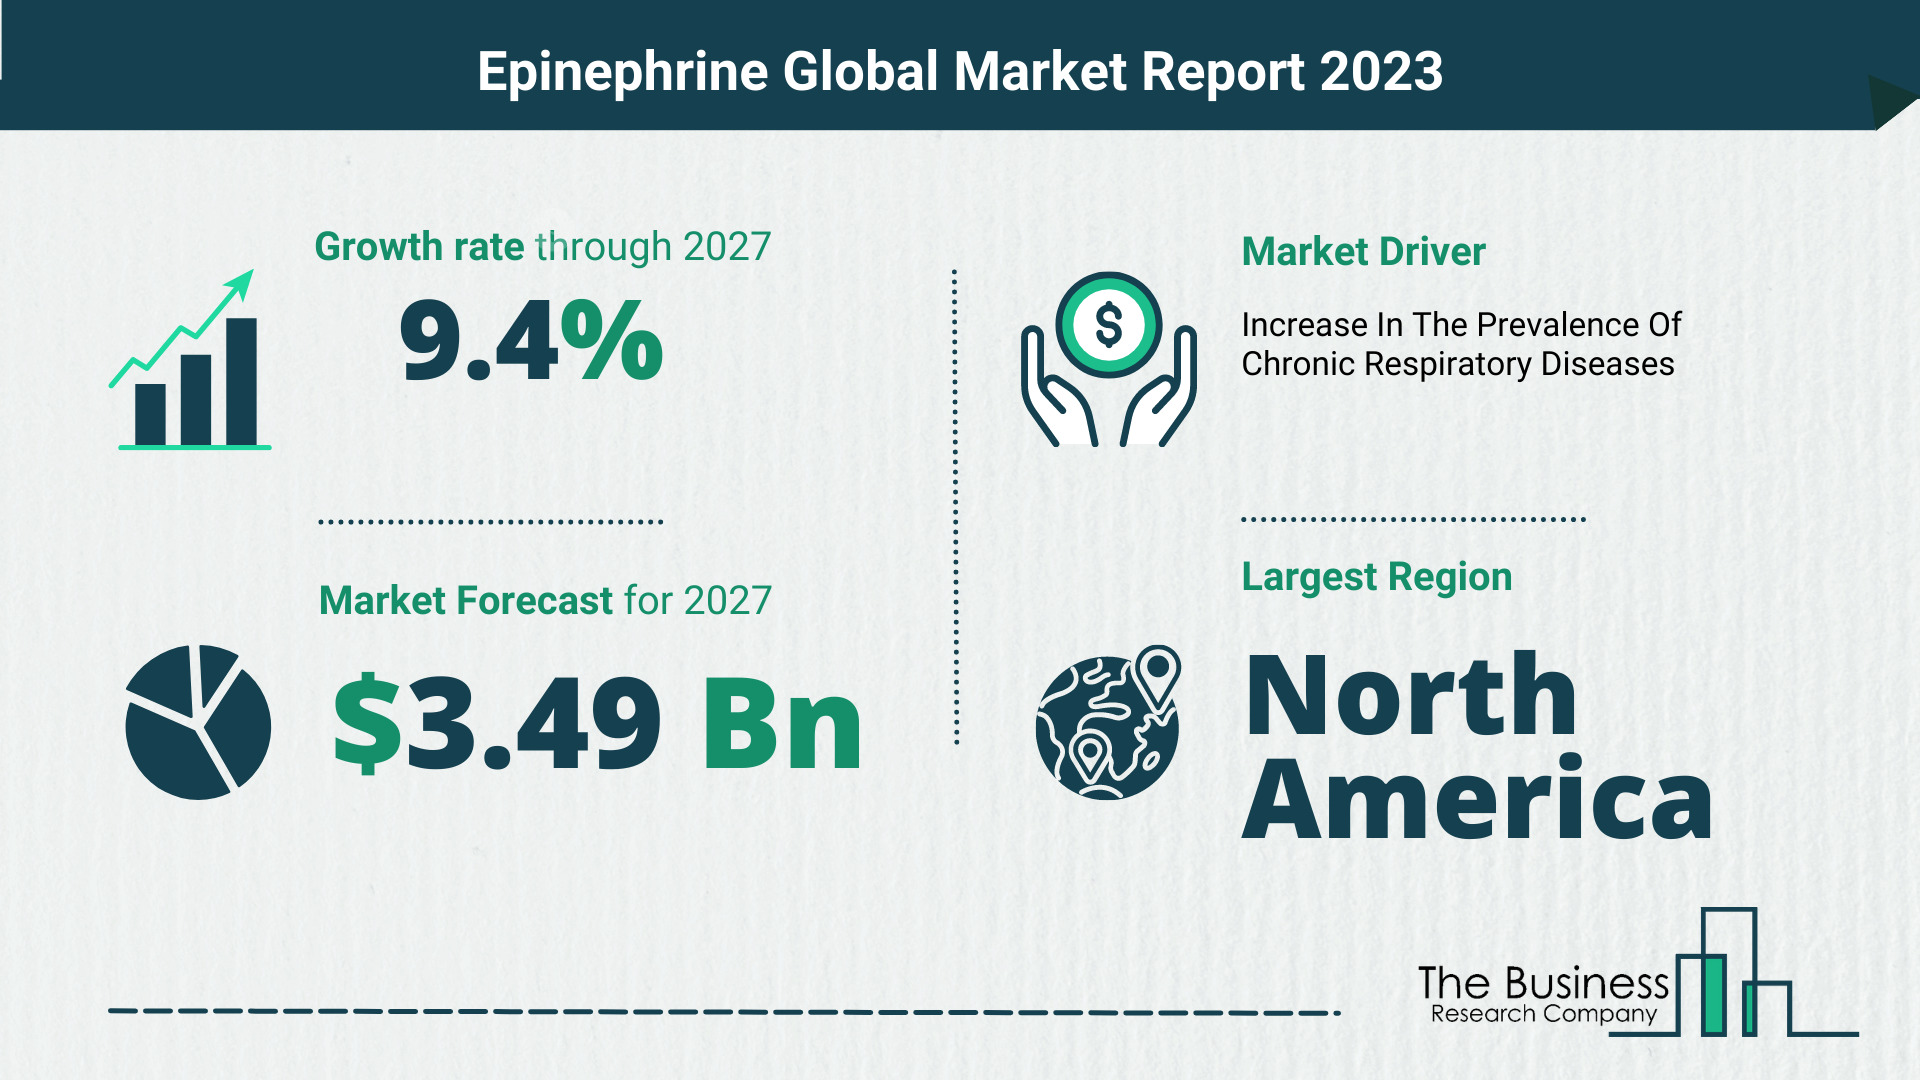 How Will The Epinephrine Market Globally Expand In 2023?